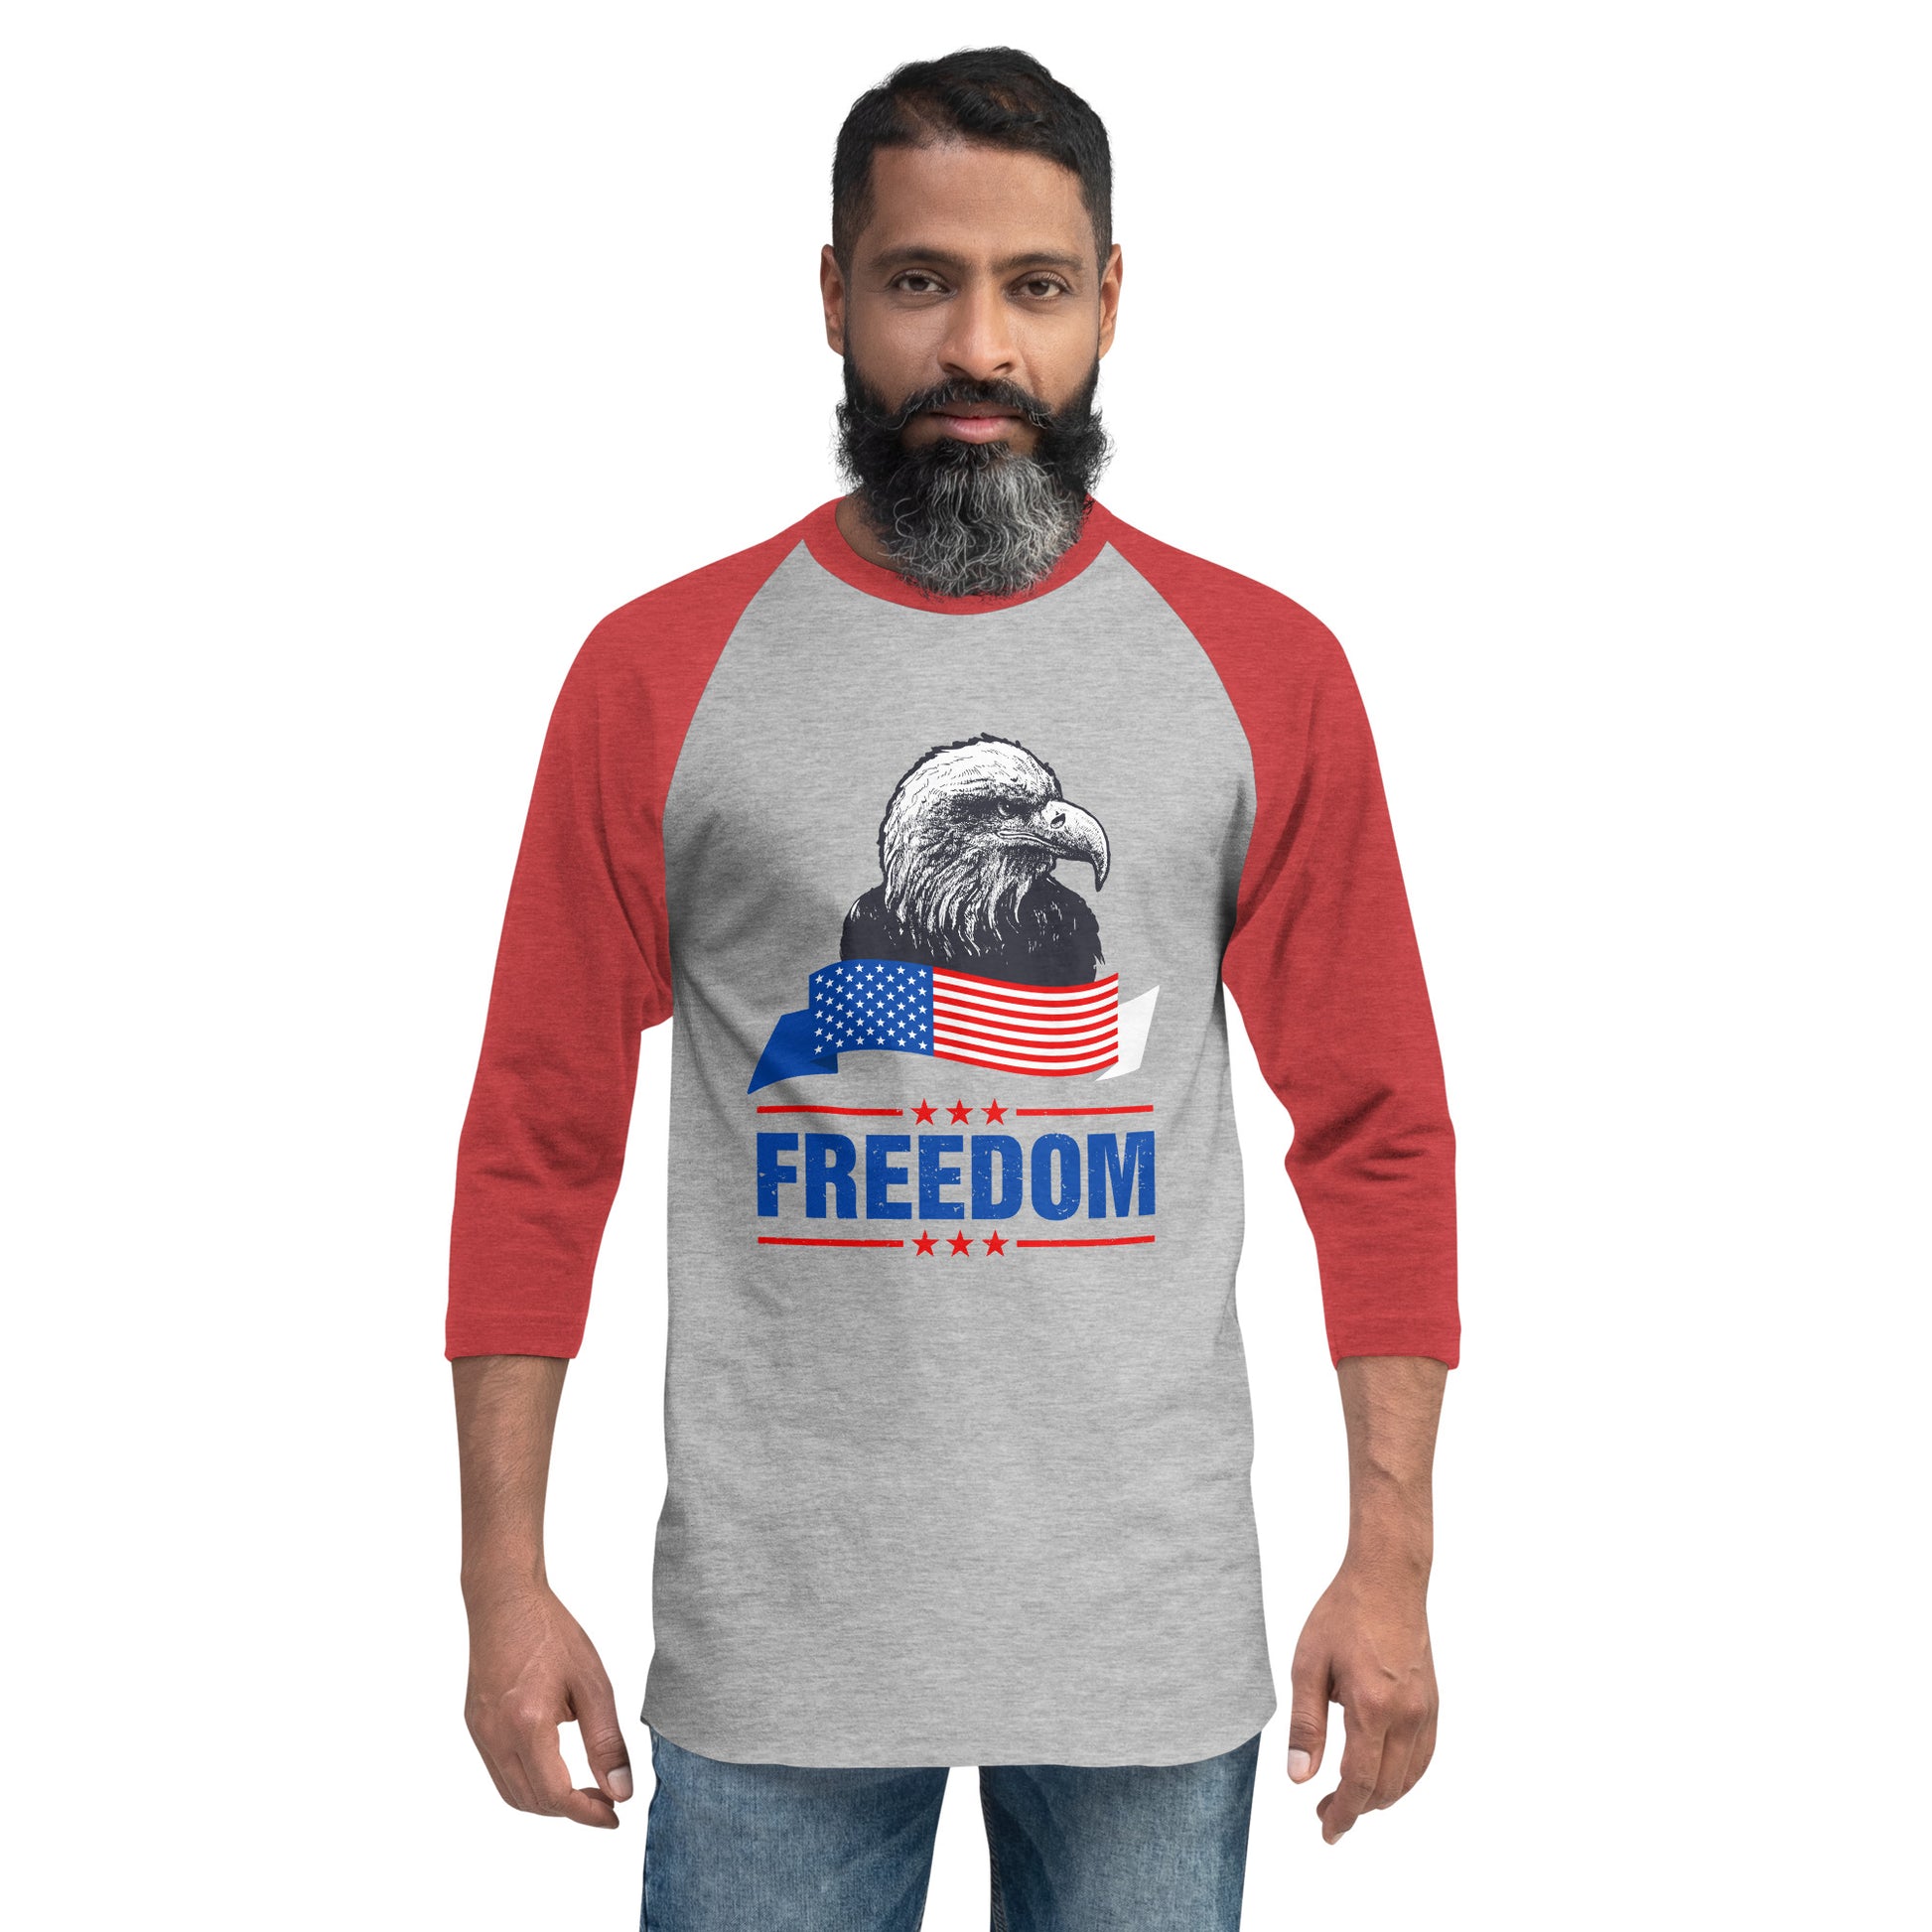 GREAT PATRIOTIC T-SHIRT EXCELLENT TO GIFT FOR ANY OCCASION